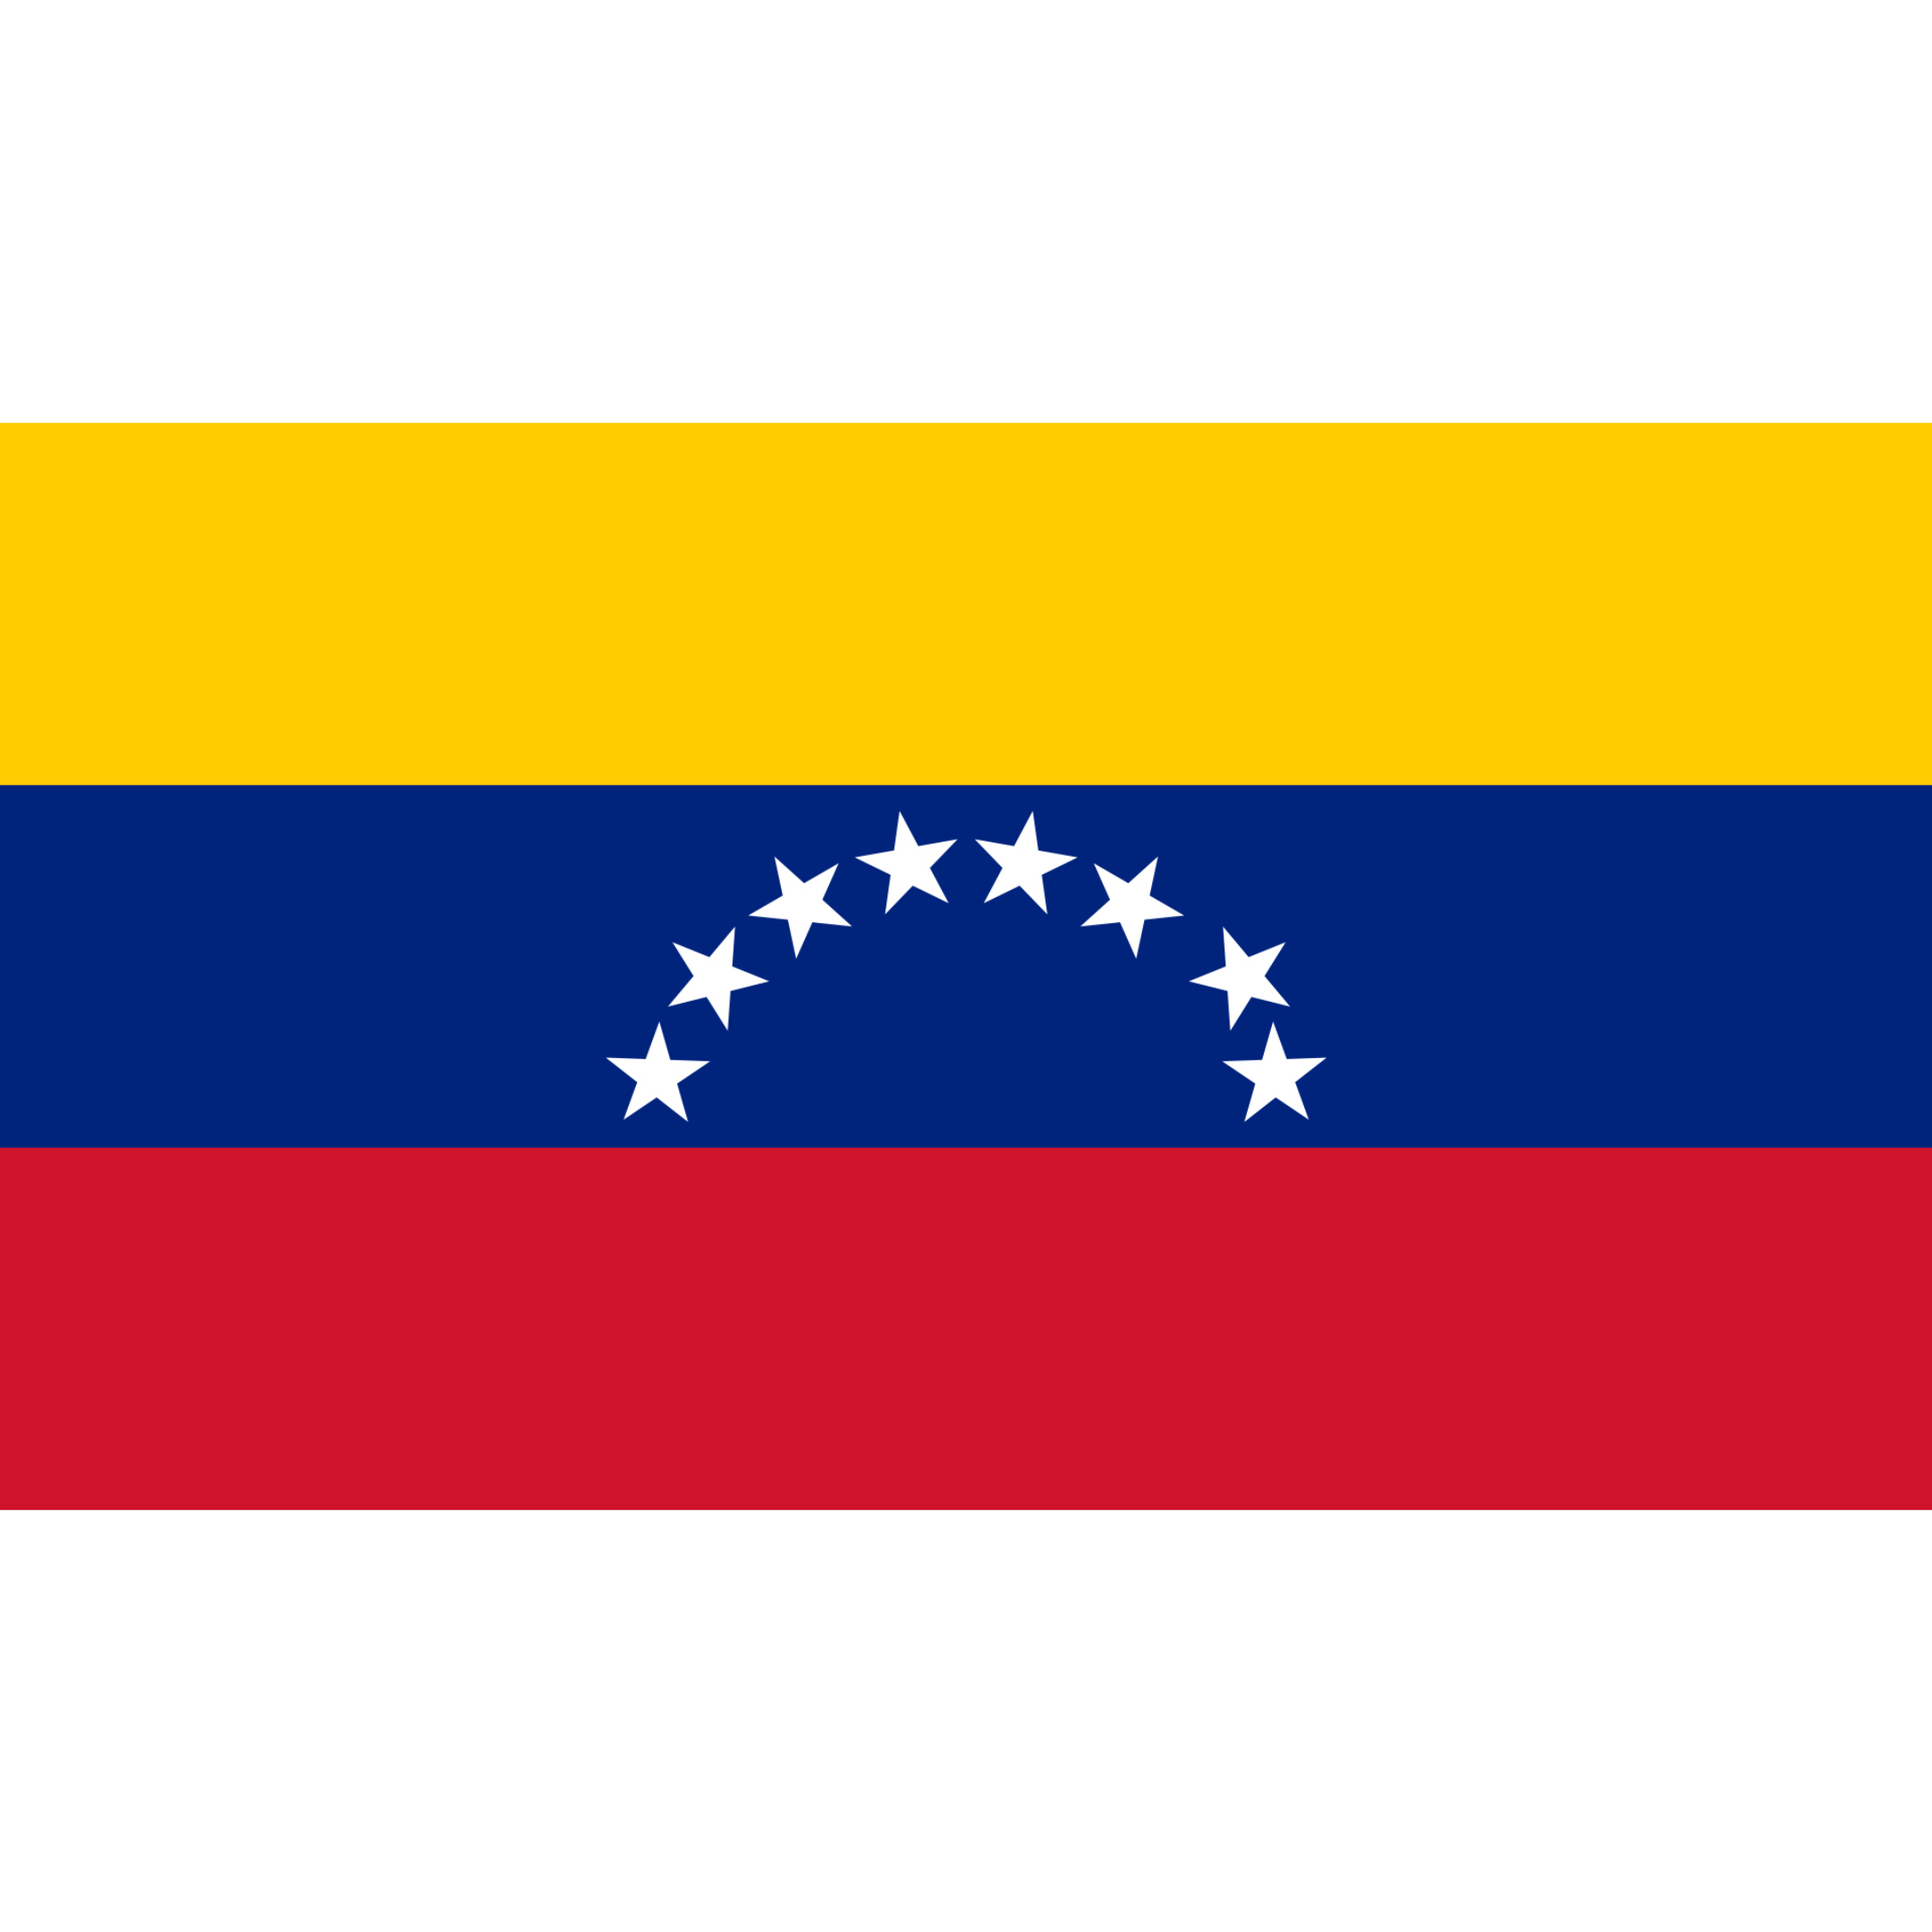 The flag of Venezuela has 3 horizontal stripes in yellow, blue and red with an arc of 8 white stars in the centre. 